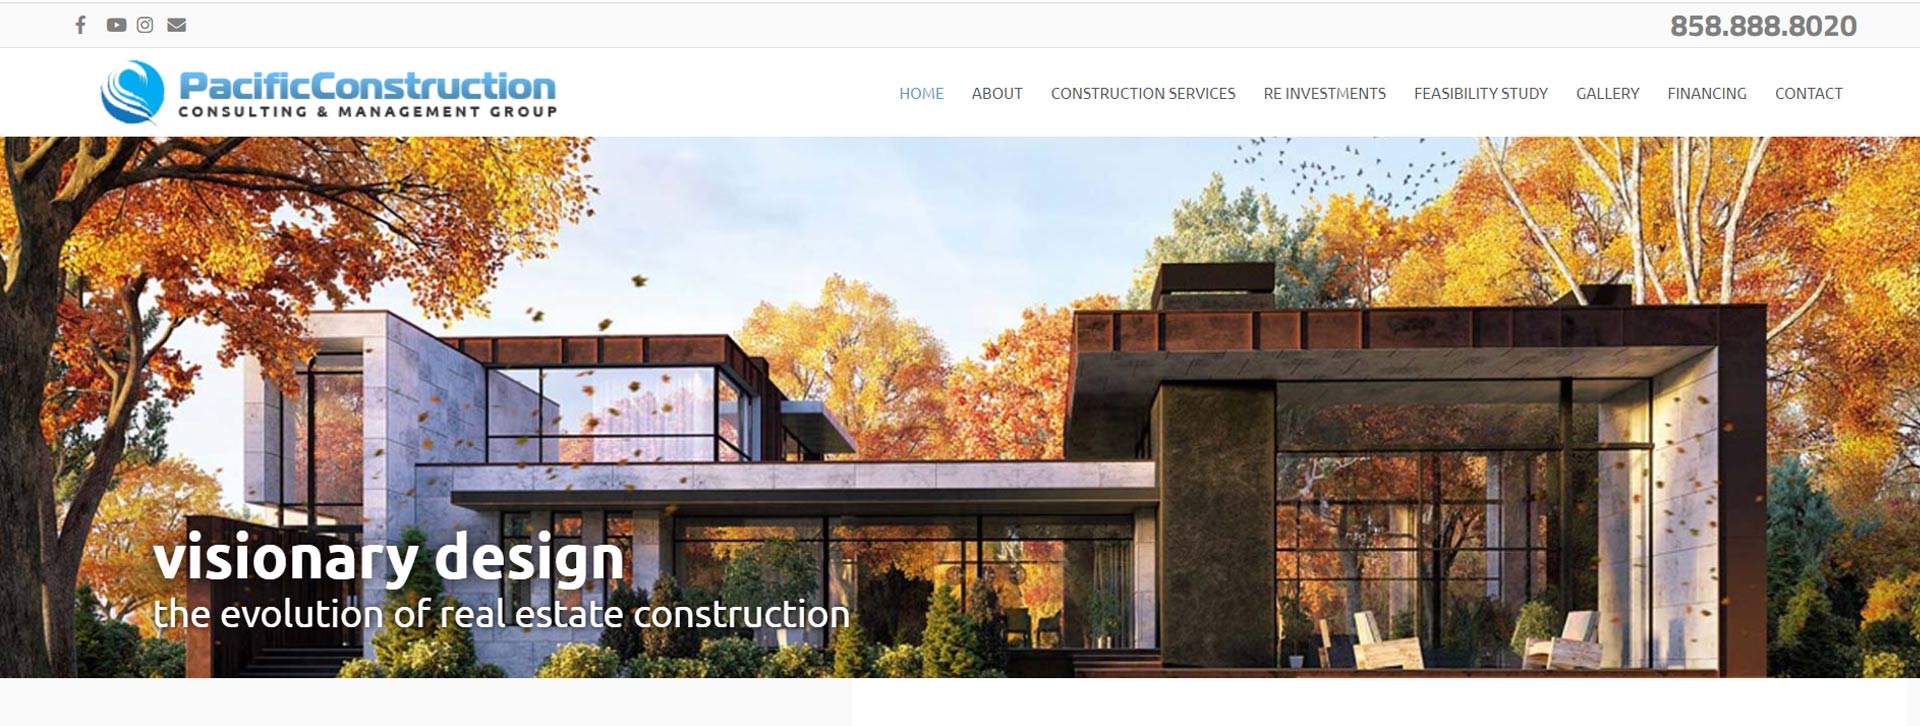 Home Construction, Remodeling, Landscape Contractor Website Design and Development in San Diego.